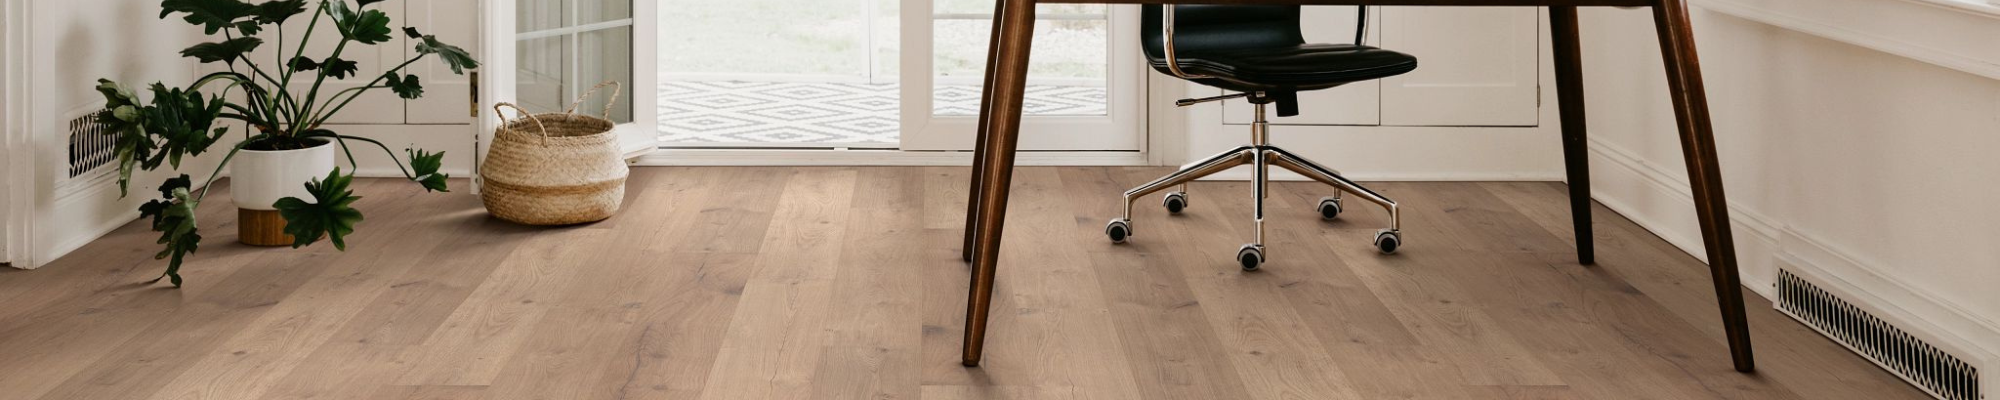 Find a variety of beautiful laminate flooring in all shade and finish, from handscraped to high gloss here at your local store, SELECT FLOORS LTD in Okotoks